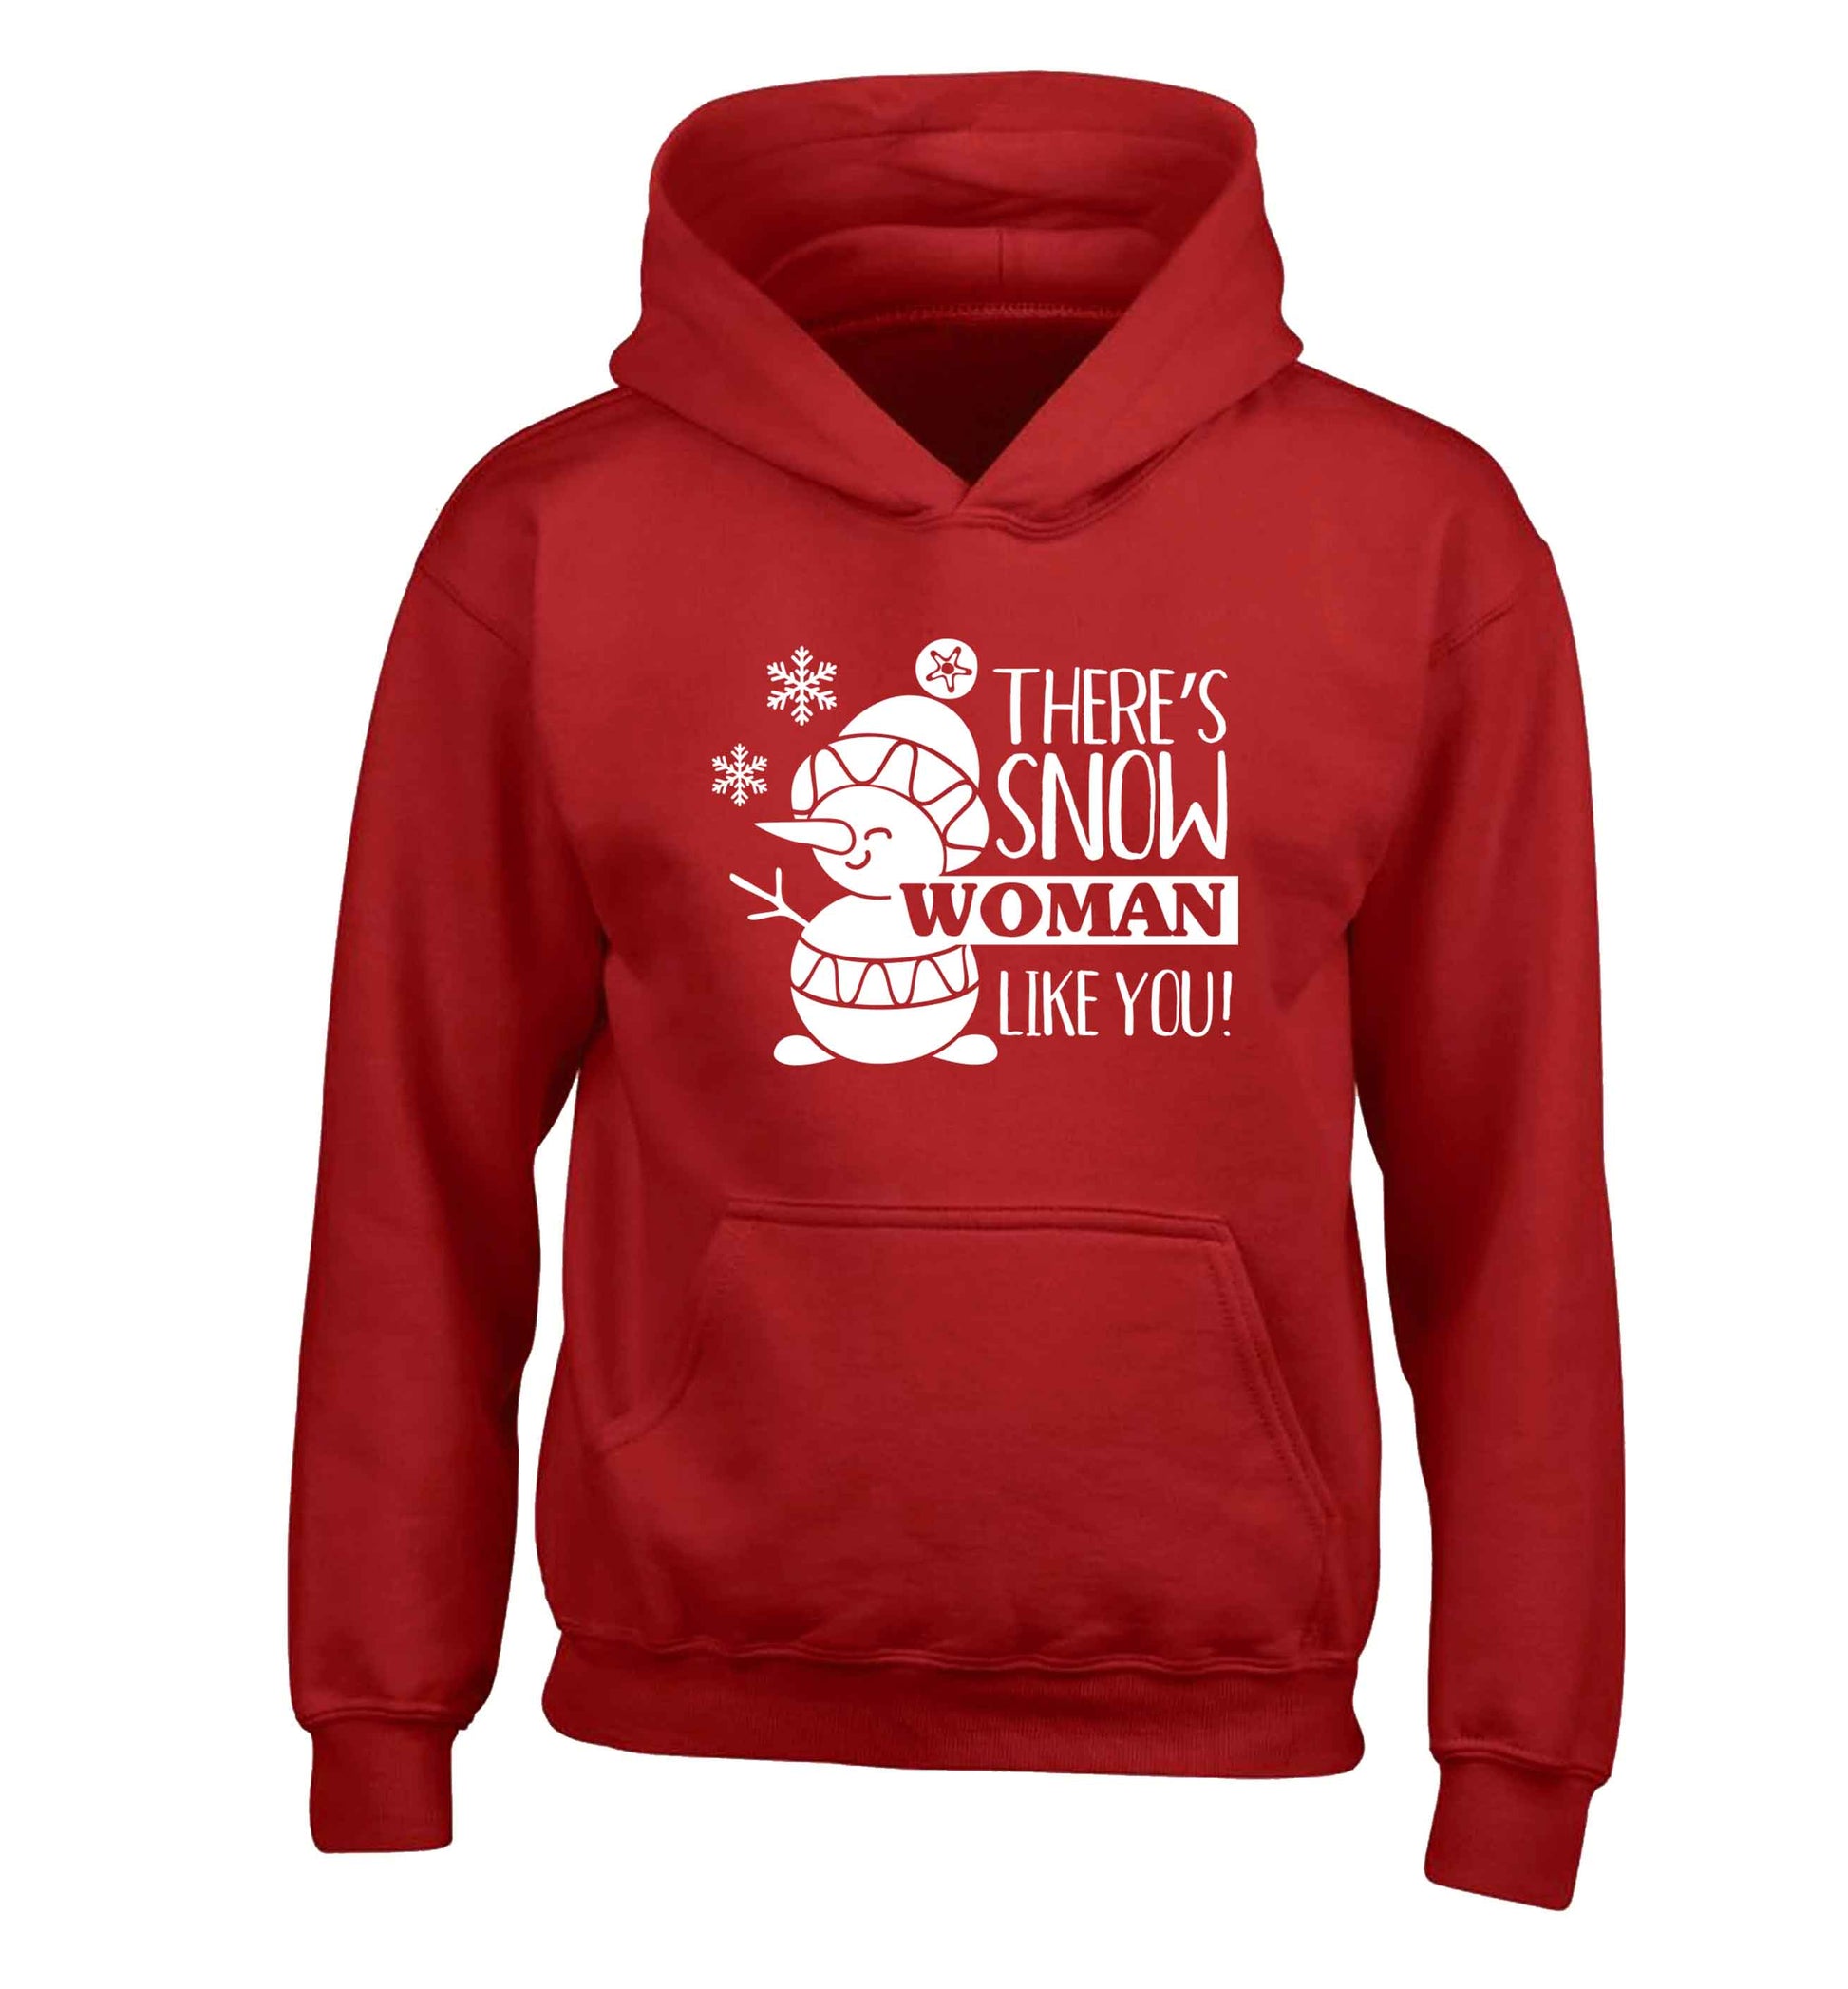 There's snow woman like you children's red hoodie 12-13 Years